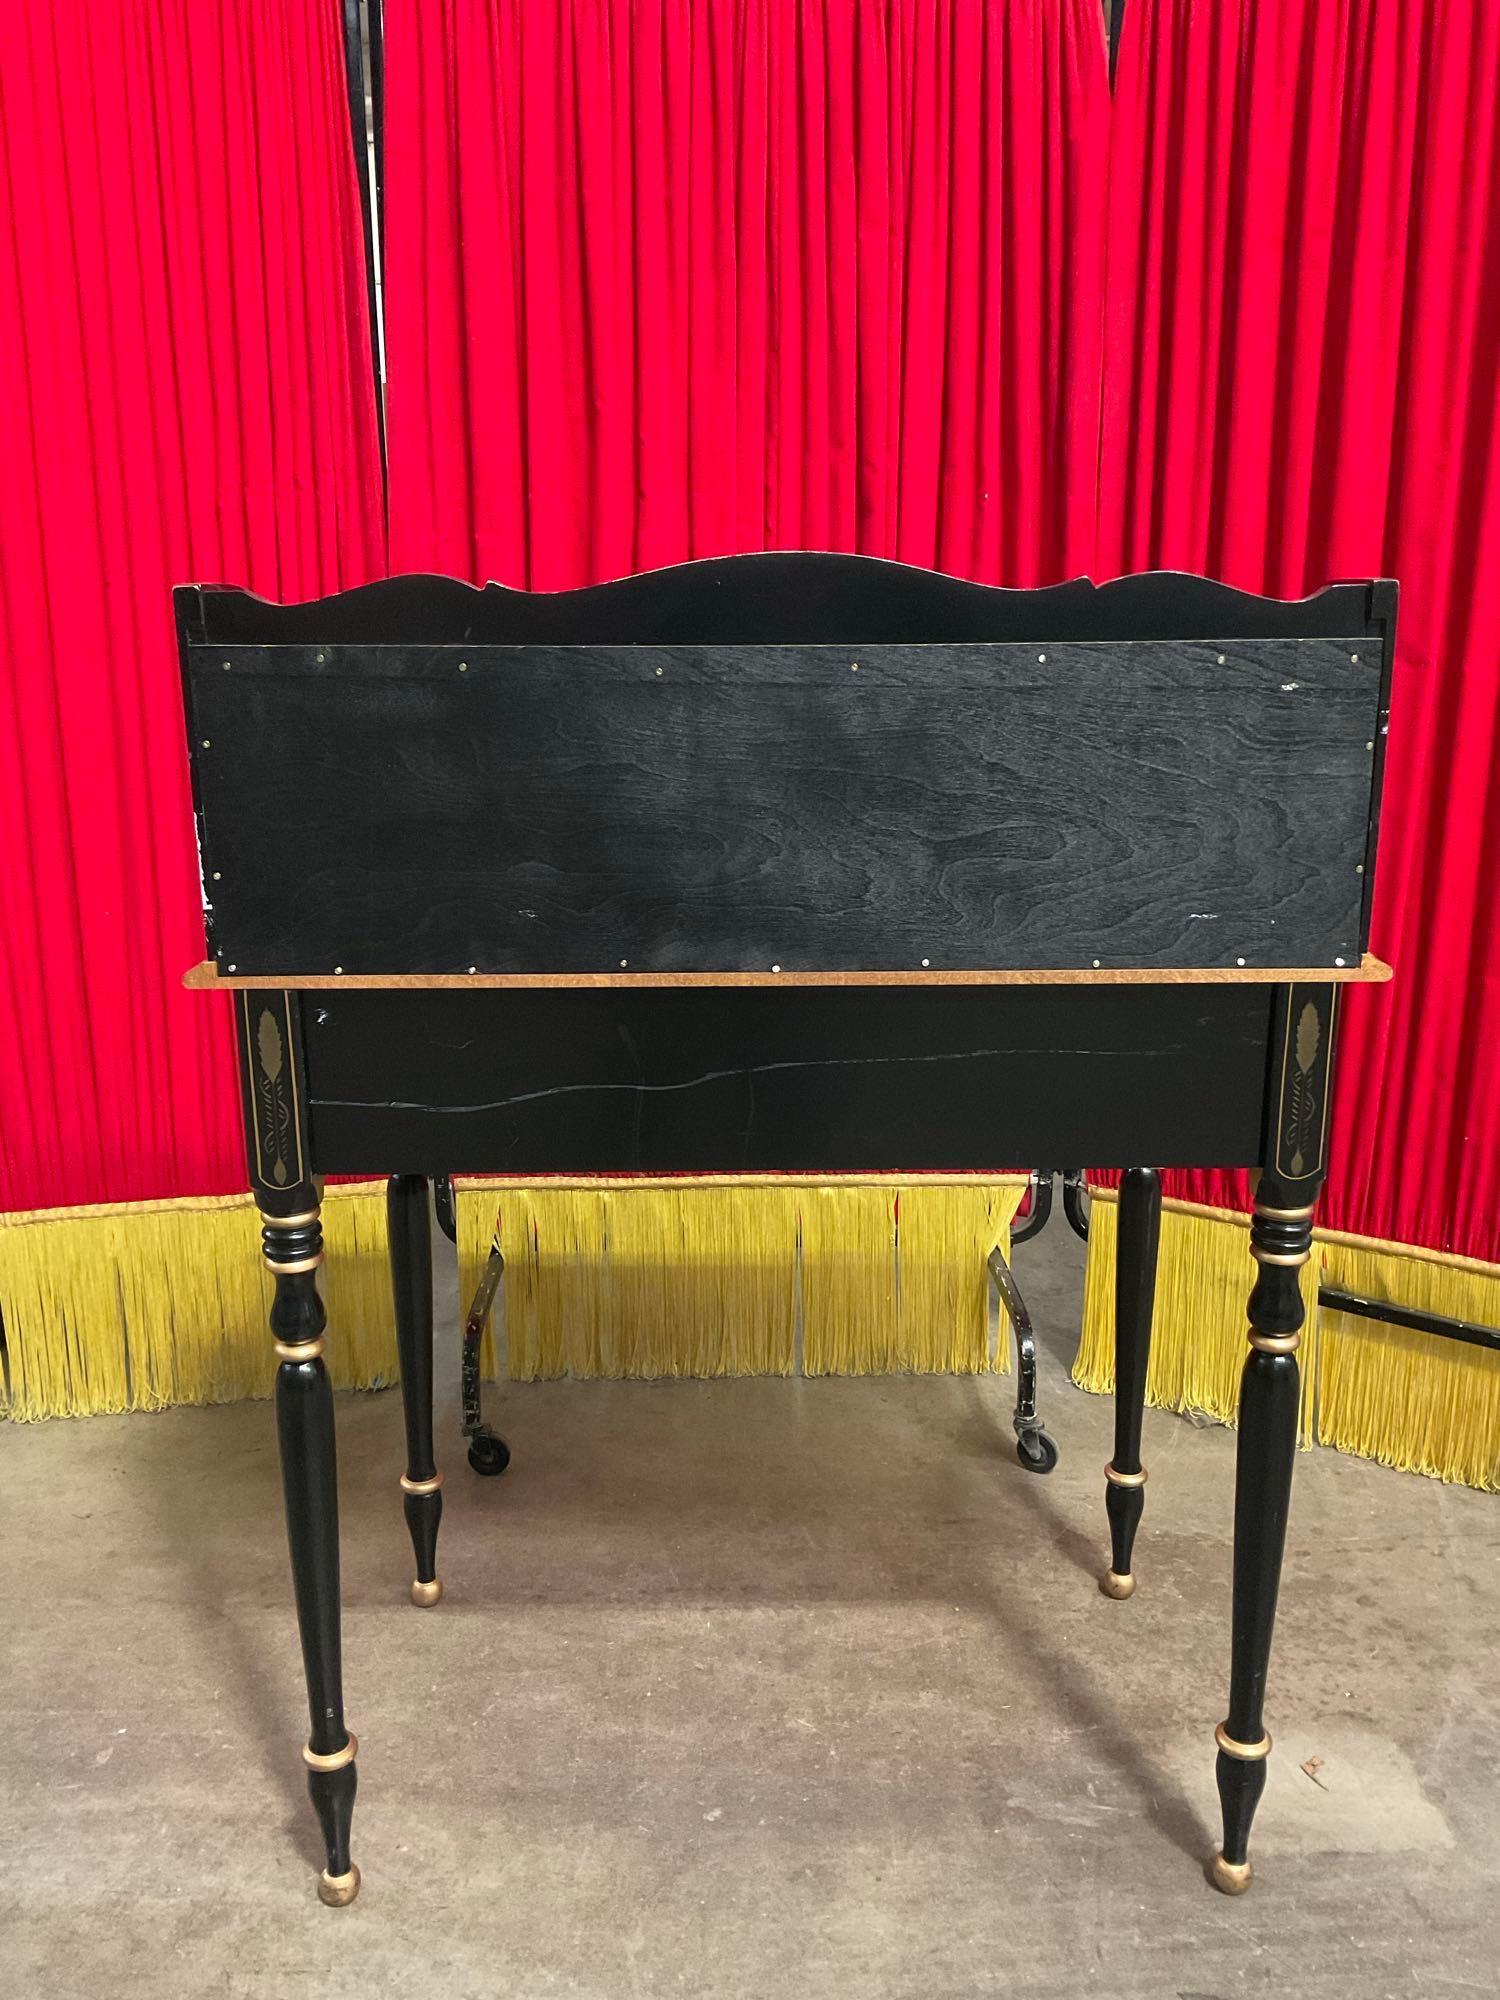 Vintage Ethan Allen Black Painted Wooden Side Desk w/ Floral & Gold Accents & 3 Drawers. See pics.